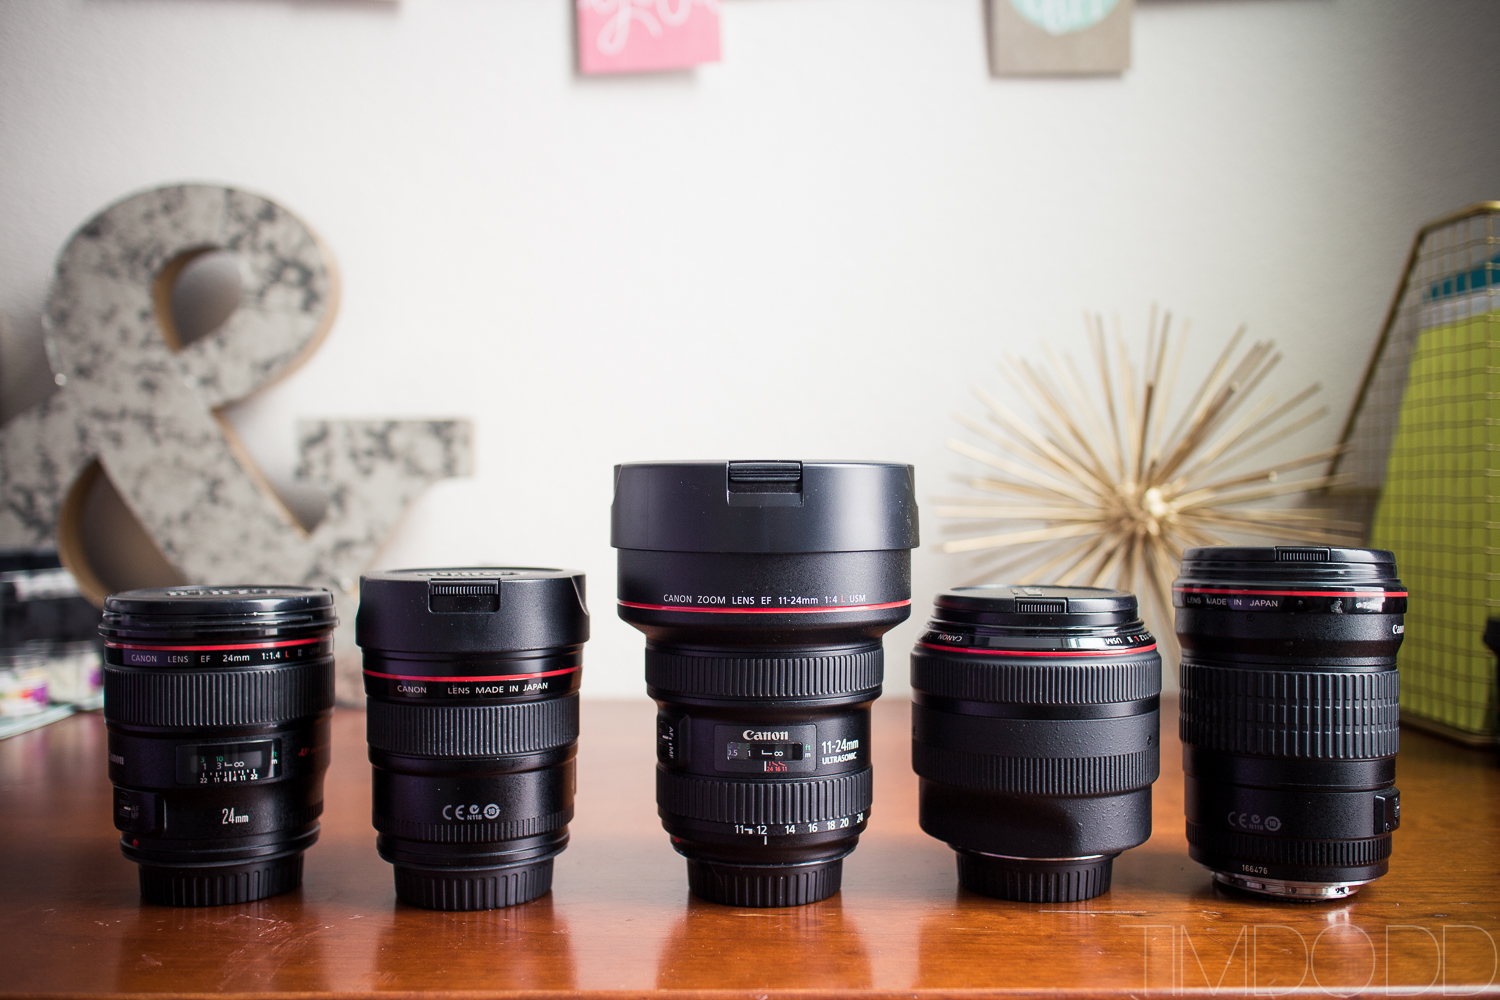 Canon 11-24 F4L review, the widest rectilinear zoom lens ever produced